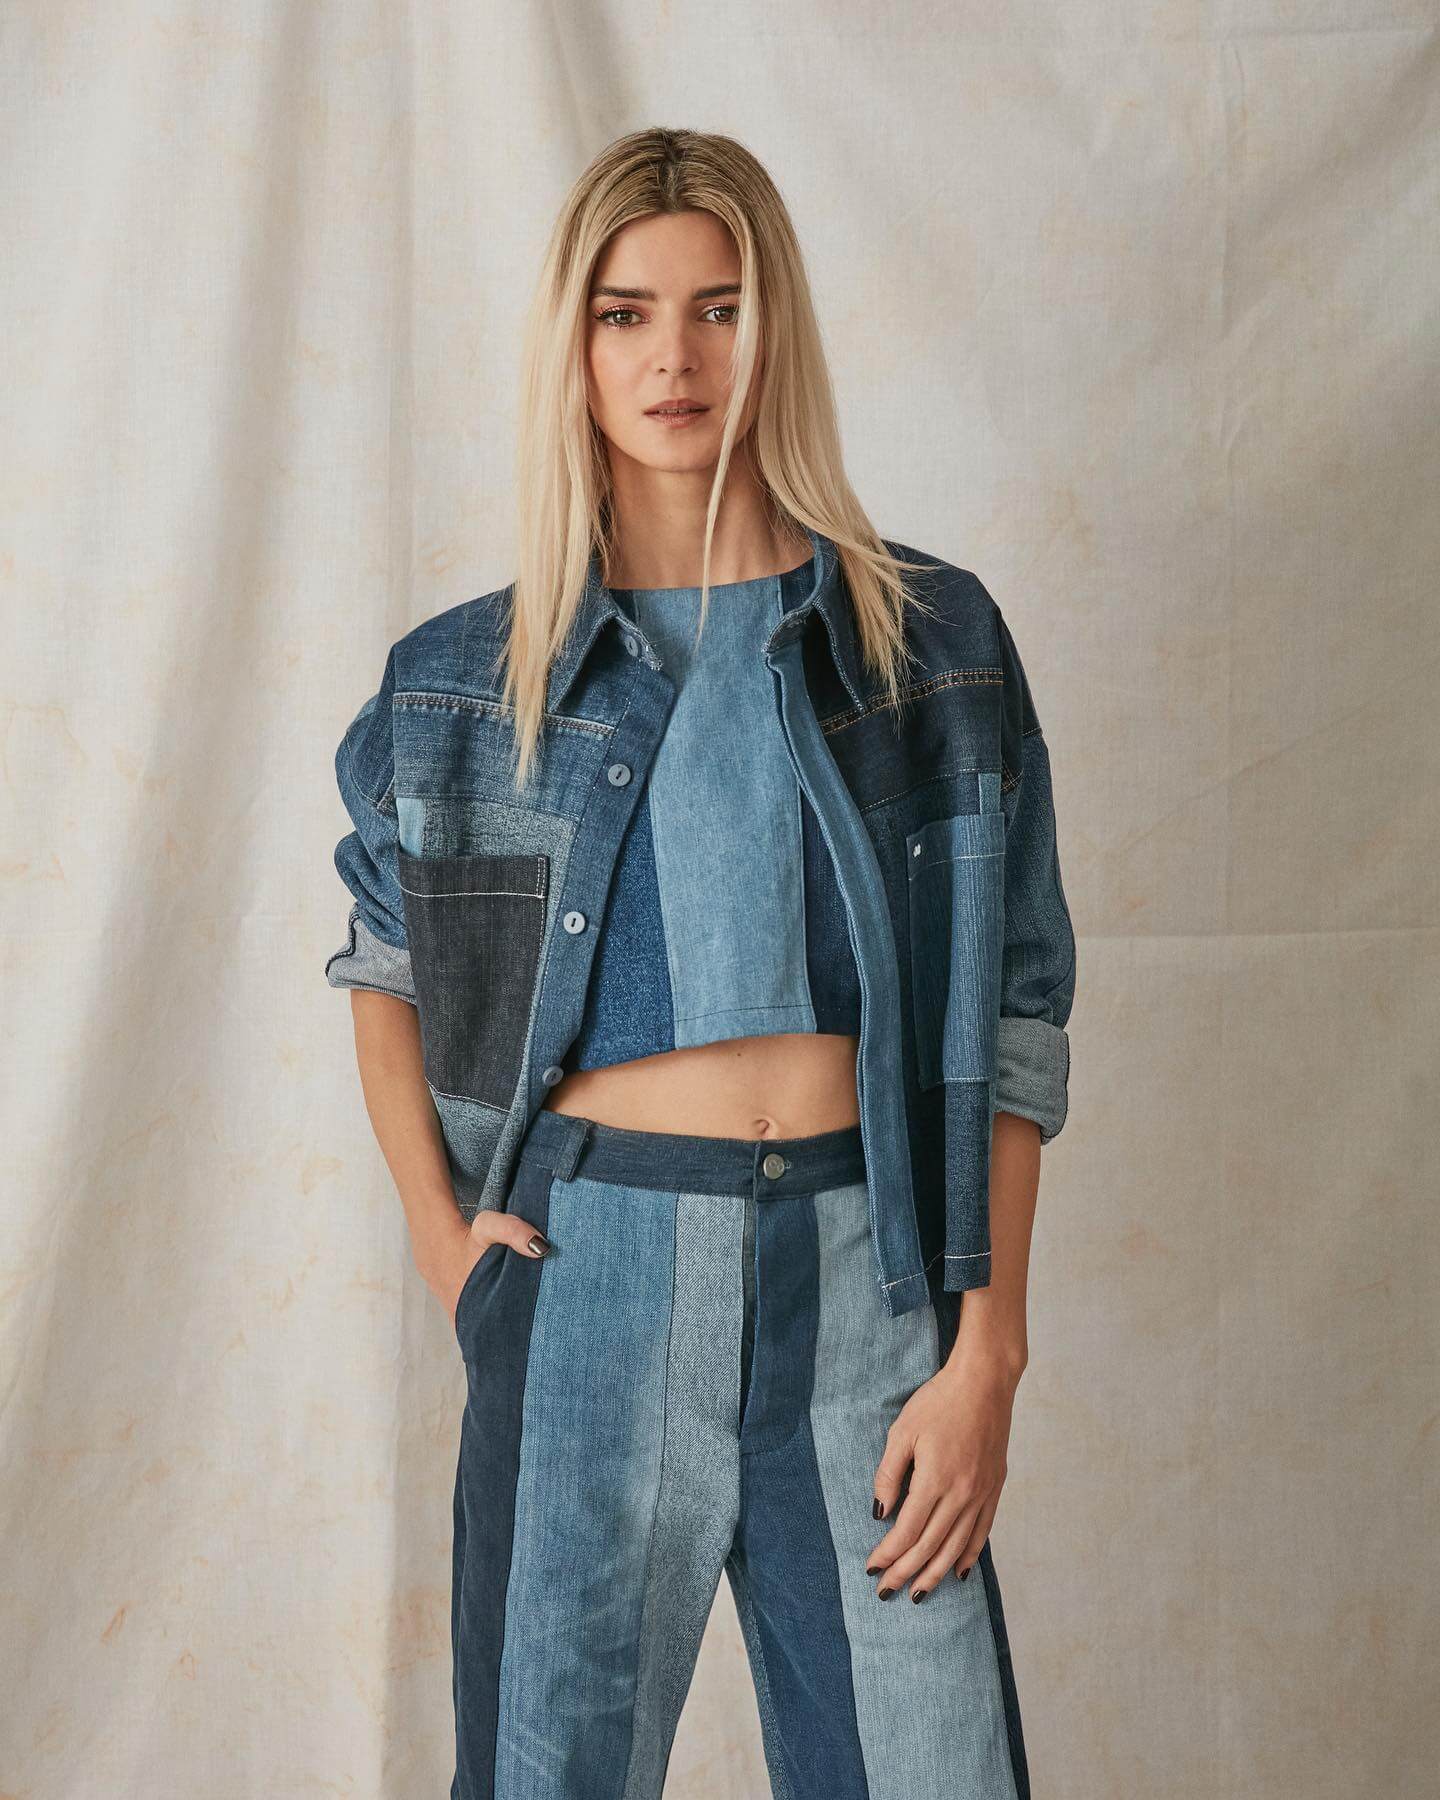 Clara Lago In Denim Jacket With Crop Top With Jeans Outfit